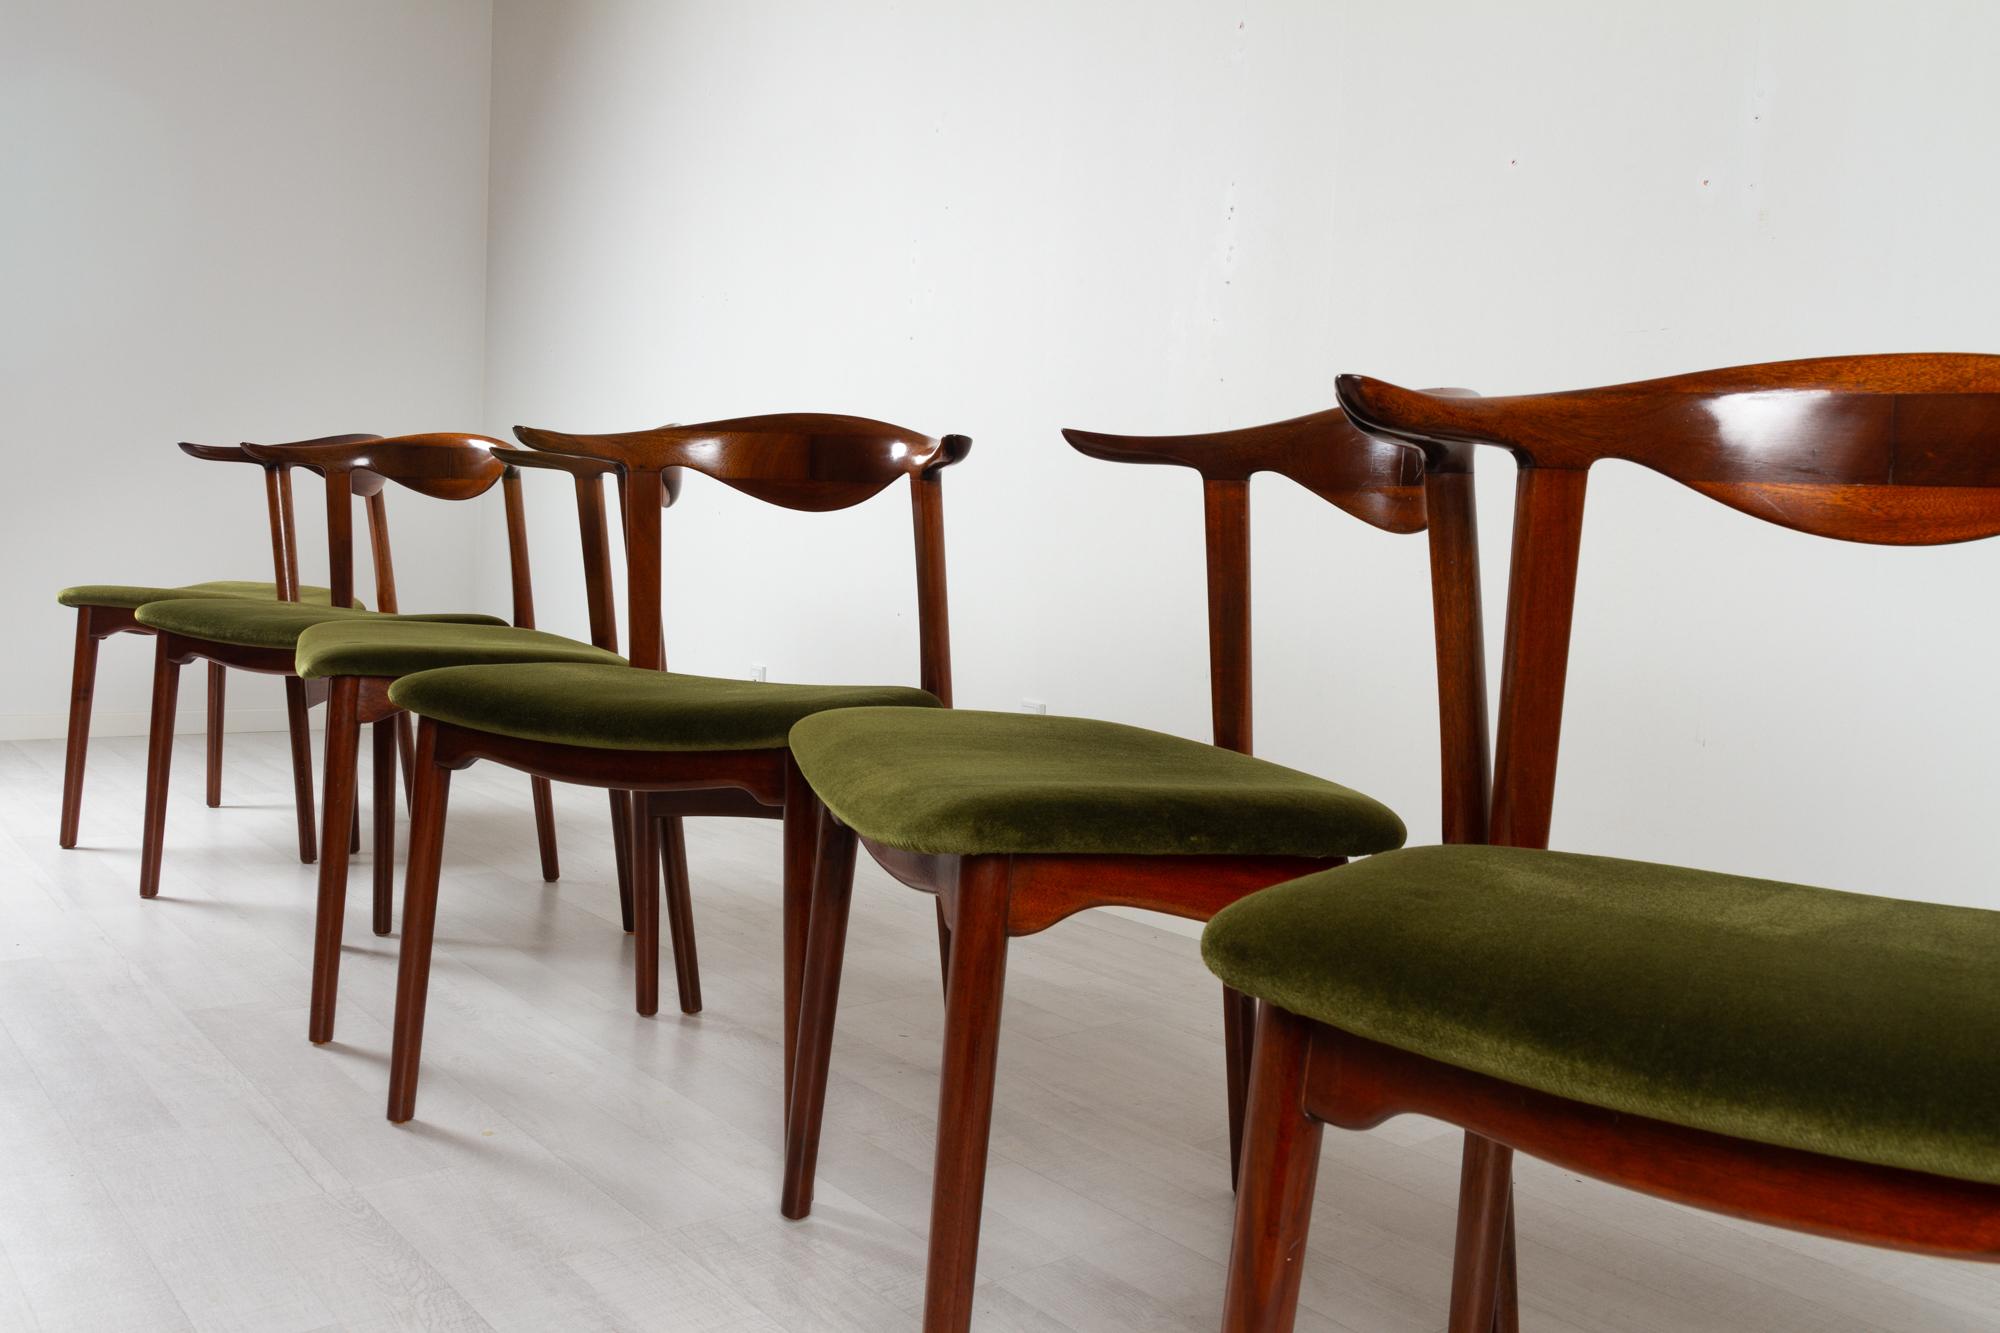 Vintage Danish Mahogany Cowhorn Chairs 1940s, Set of 6 For Sale 2